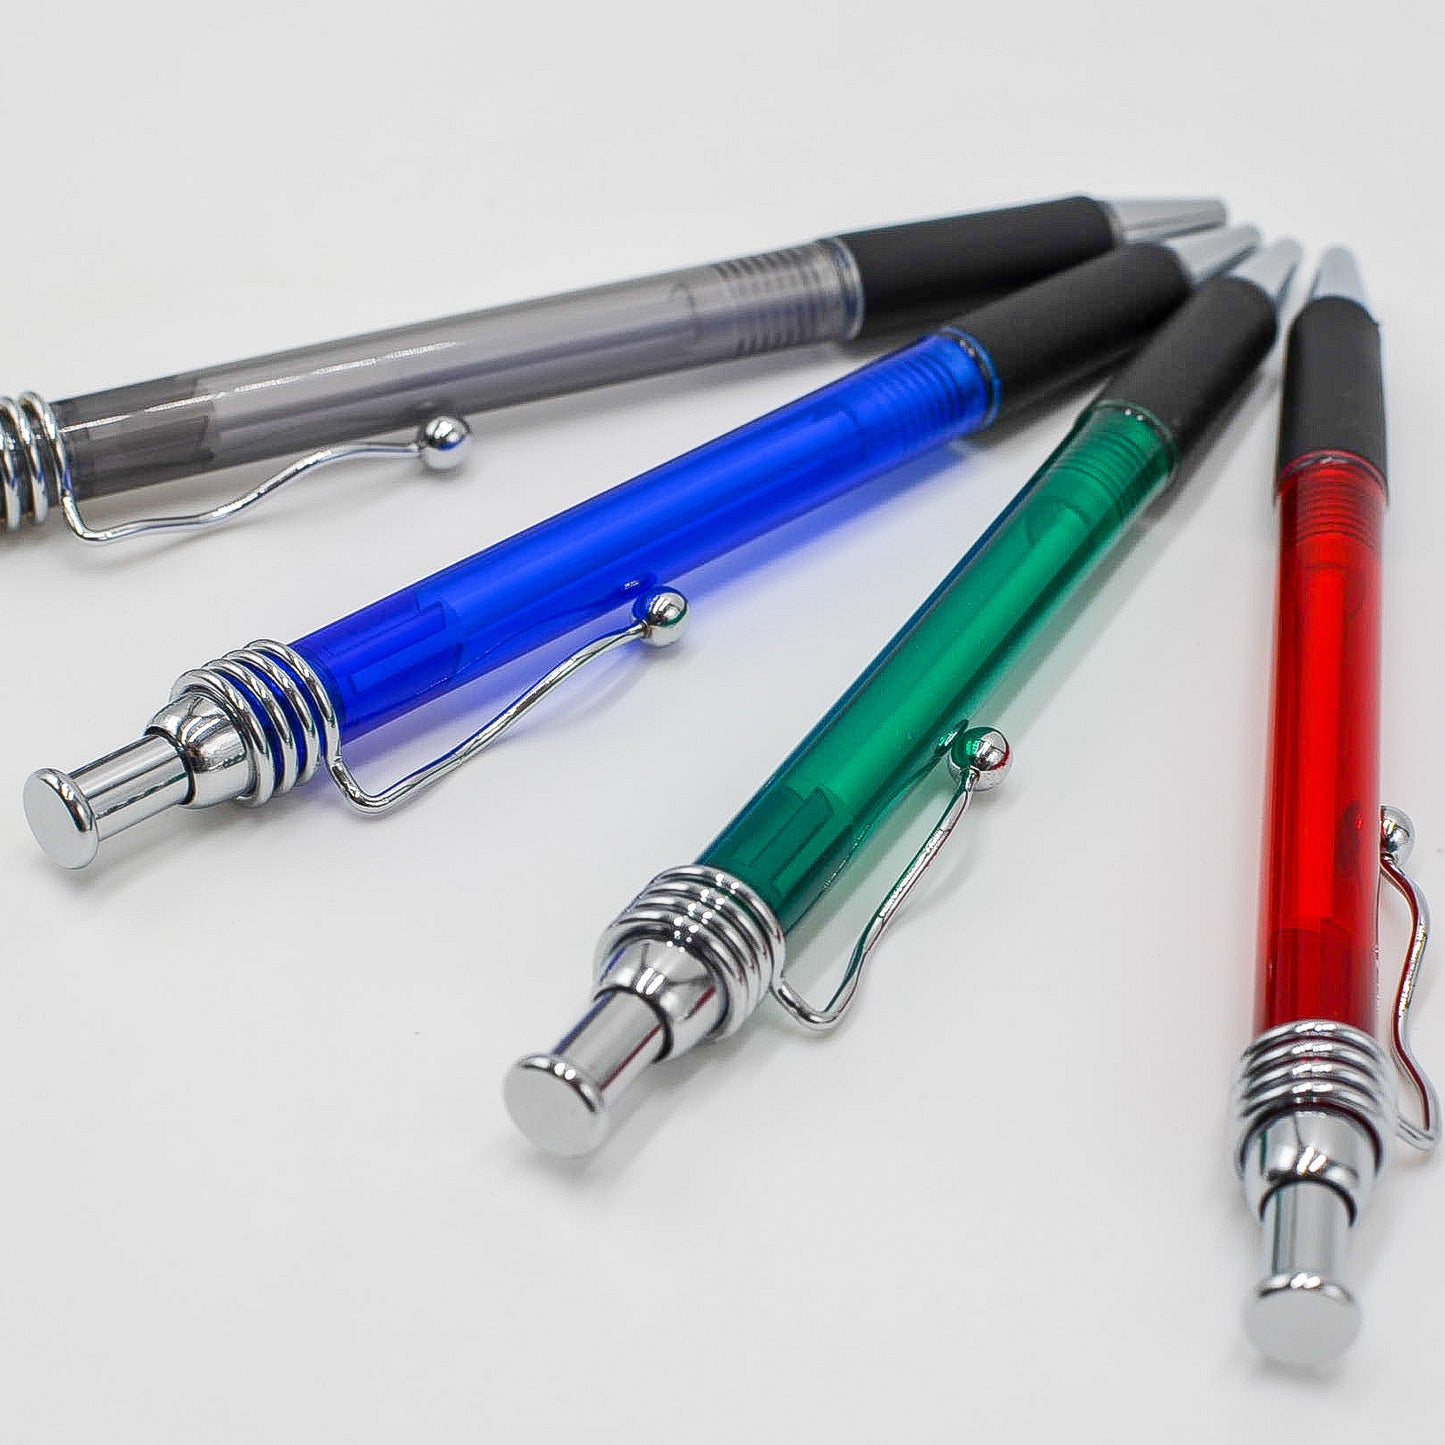 Pens: Multi-Colored Ballpoint Pen with Black Ink